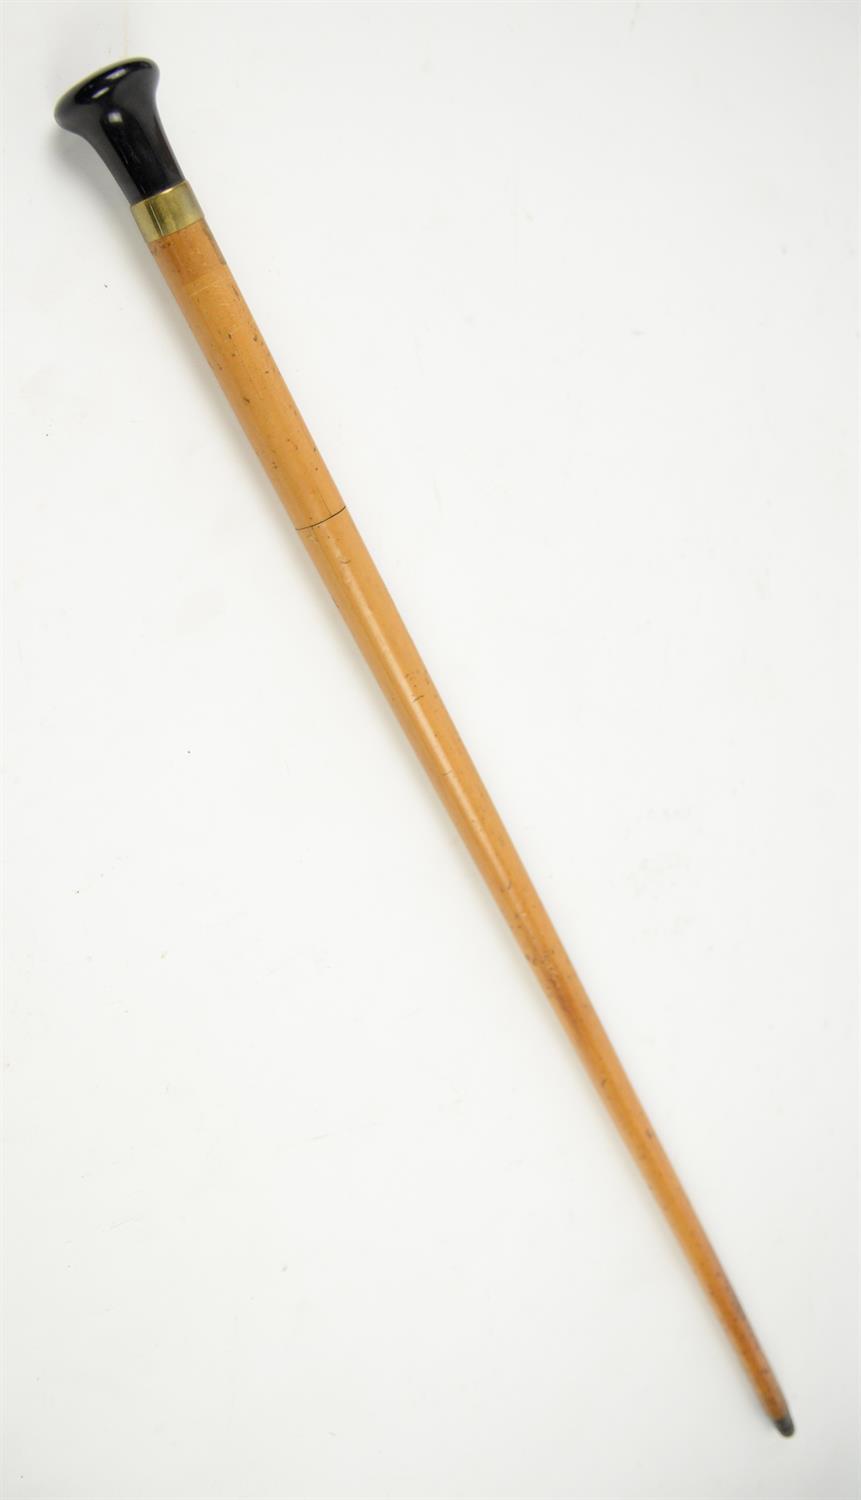 Late 19th century malacca swordstick with brass mounted black handle, 91cm long,